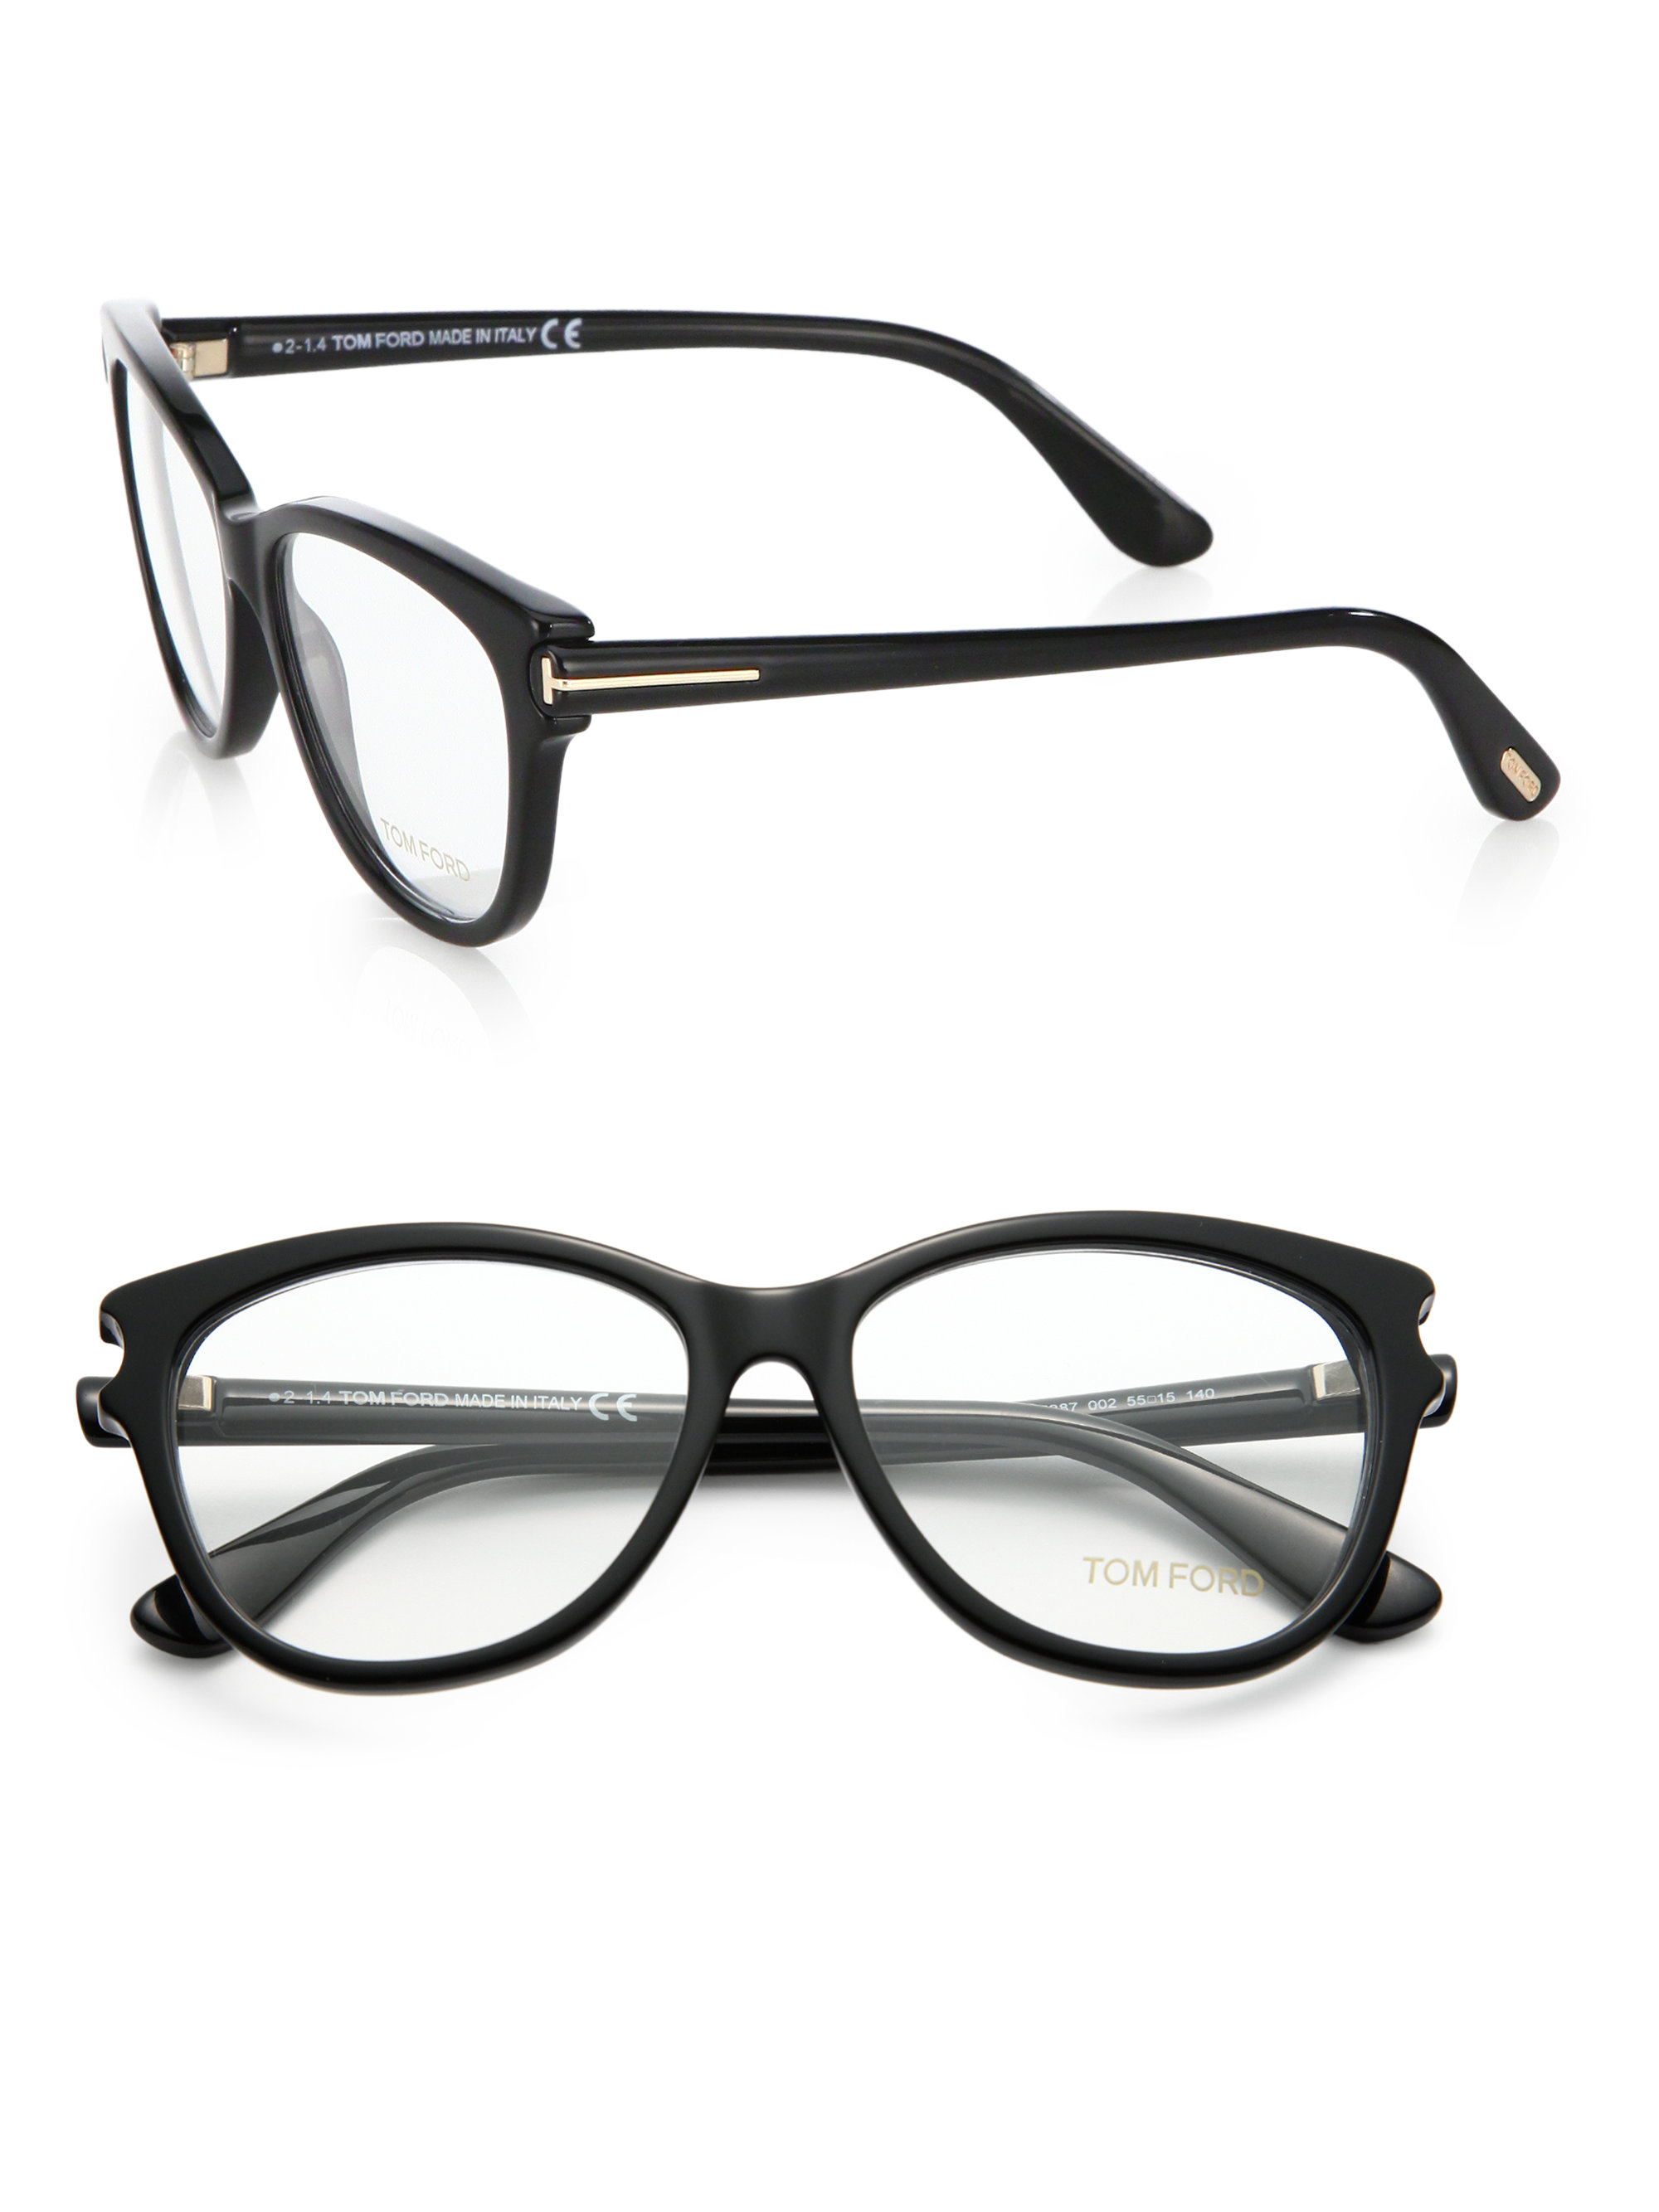 Tom ford Oversized Plastic Ophthalmic Frames in Black | Lyst